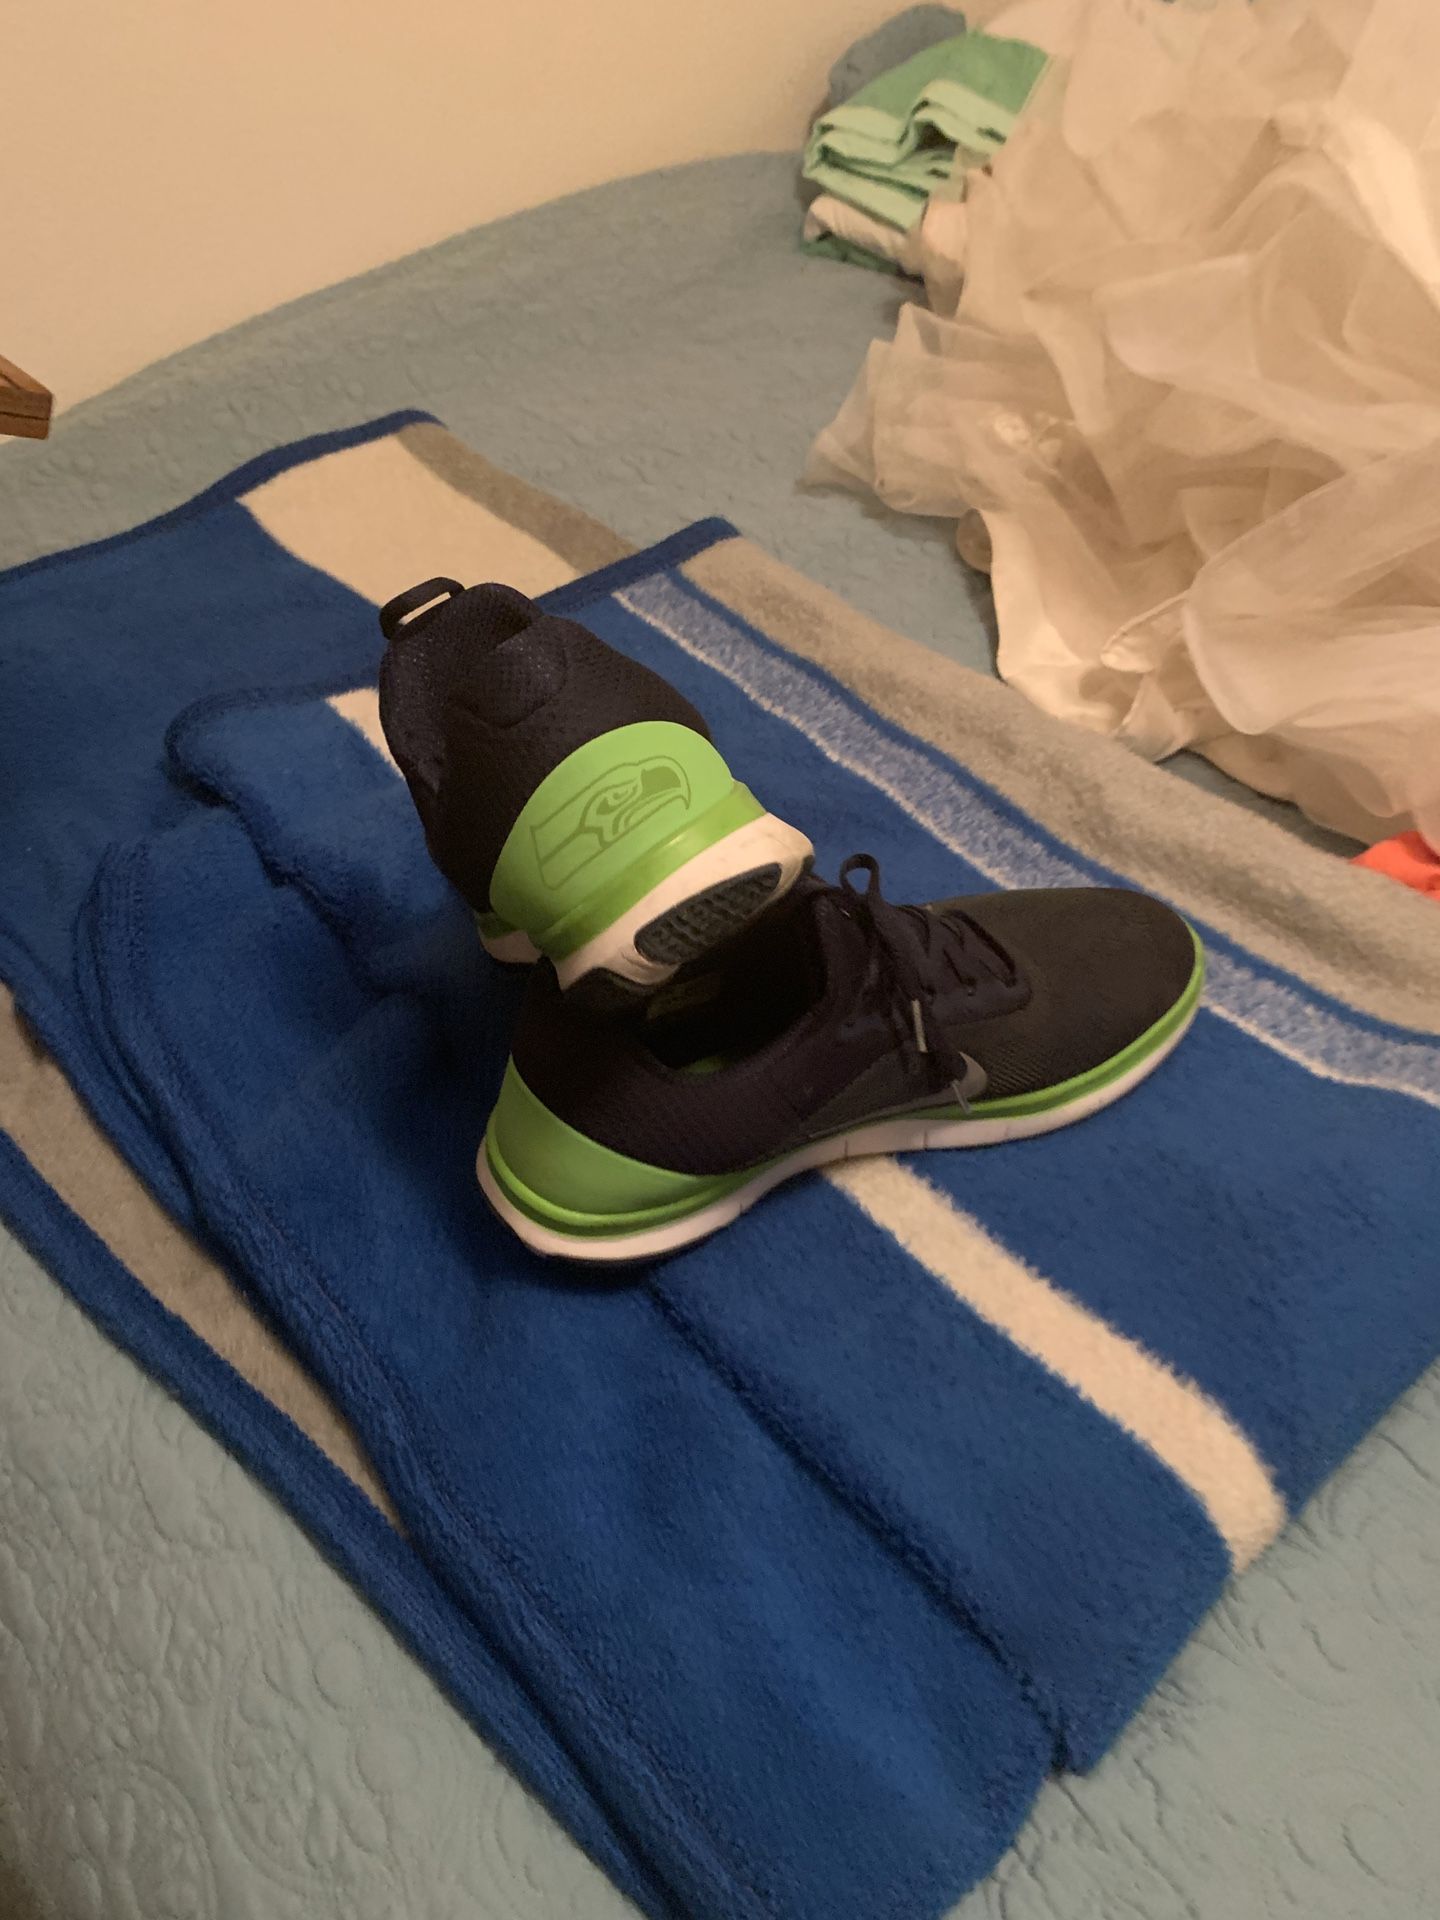 Seahawks shoes. Size12. Not worn much. $65.00